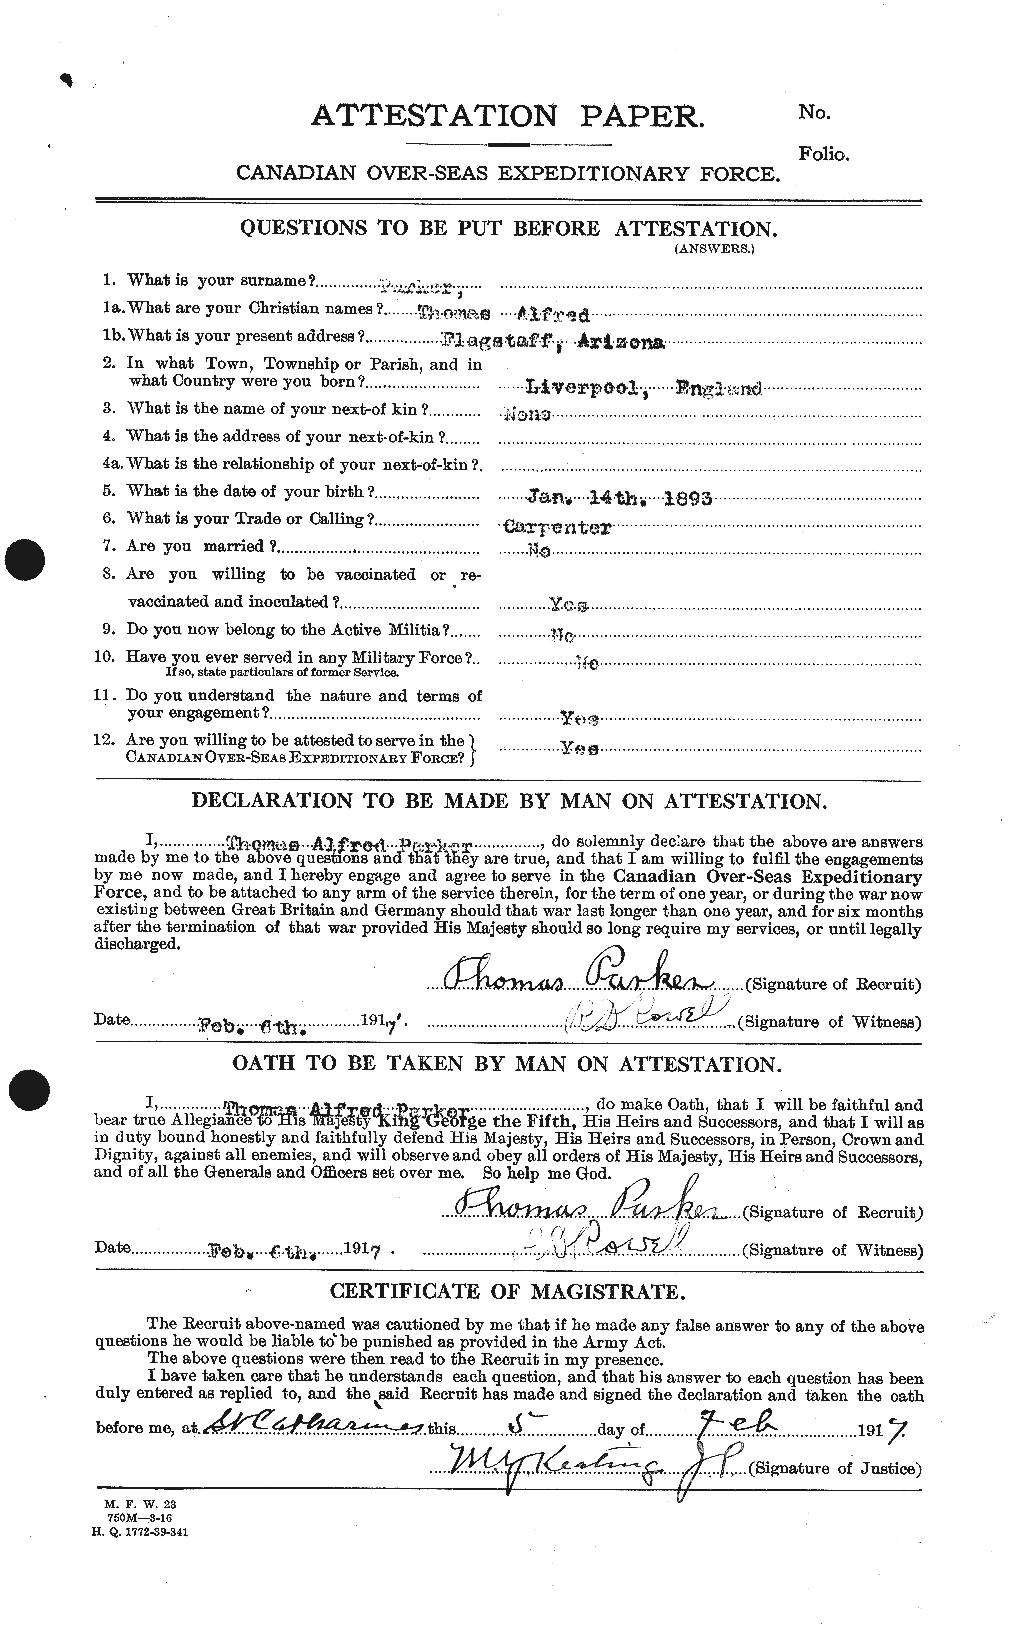 Personnel Records of the First World War - CEF 565660a